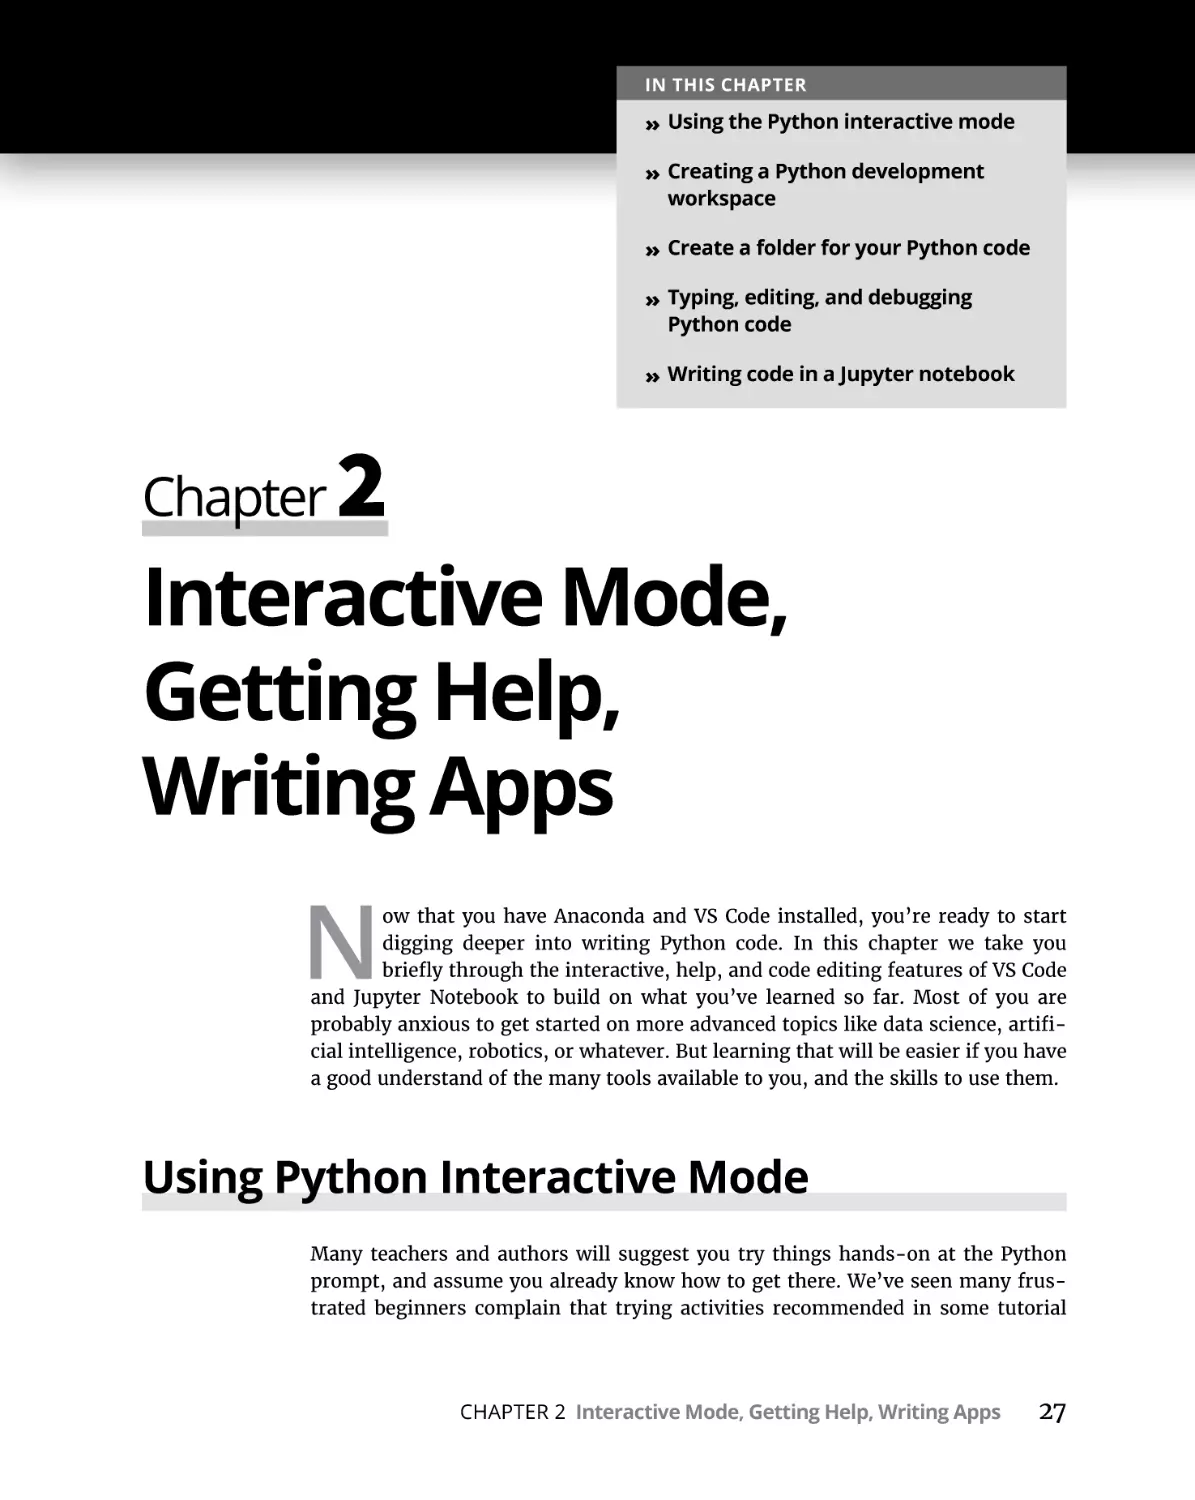 Chapter 2 Interactive Mode, Getting Help, Writing Apps
Using Python Interactive Mode